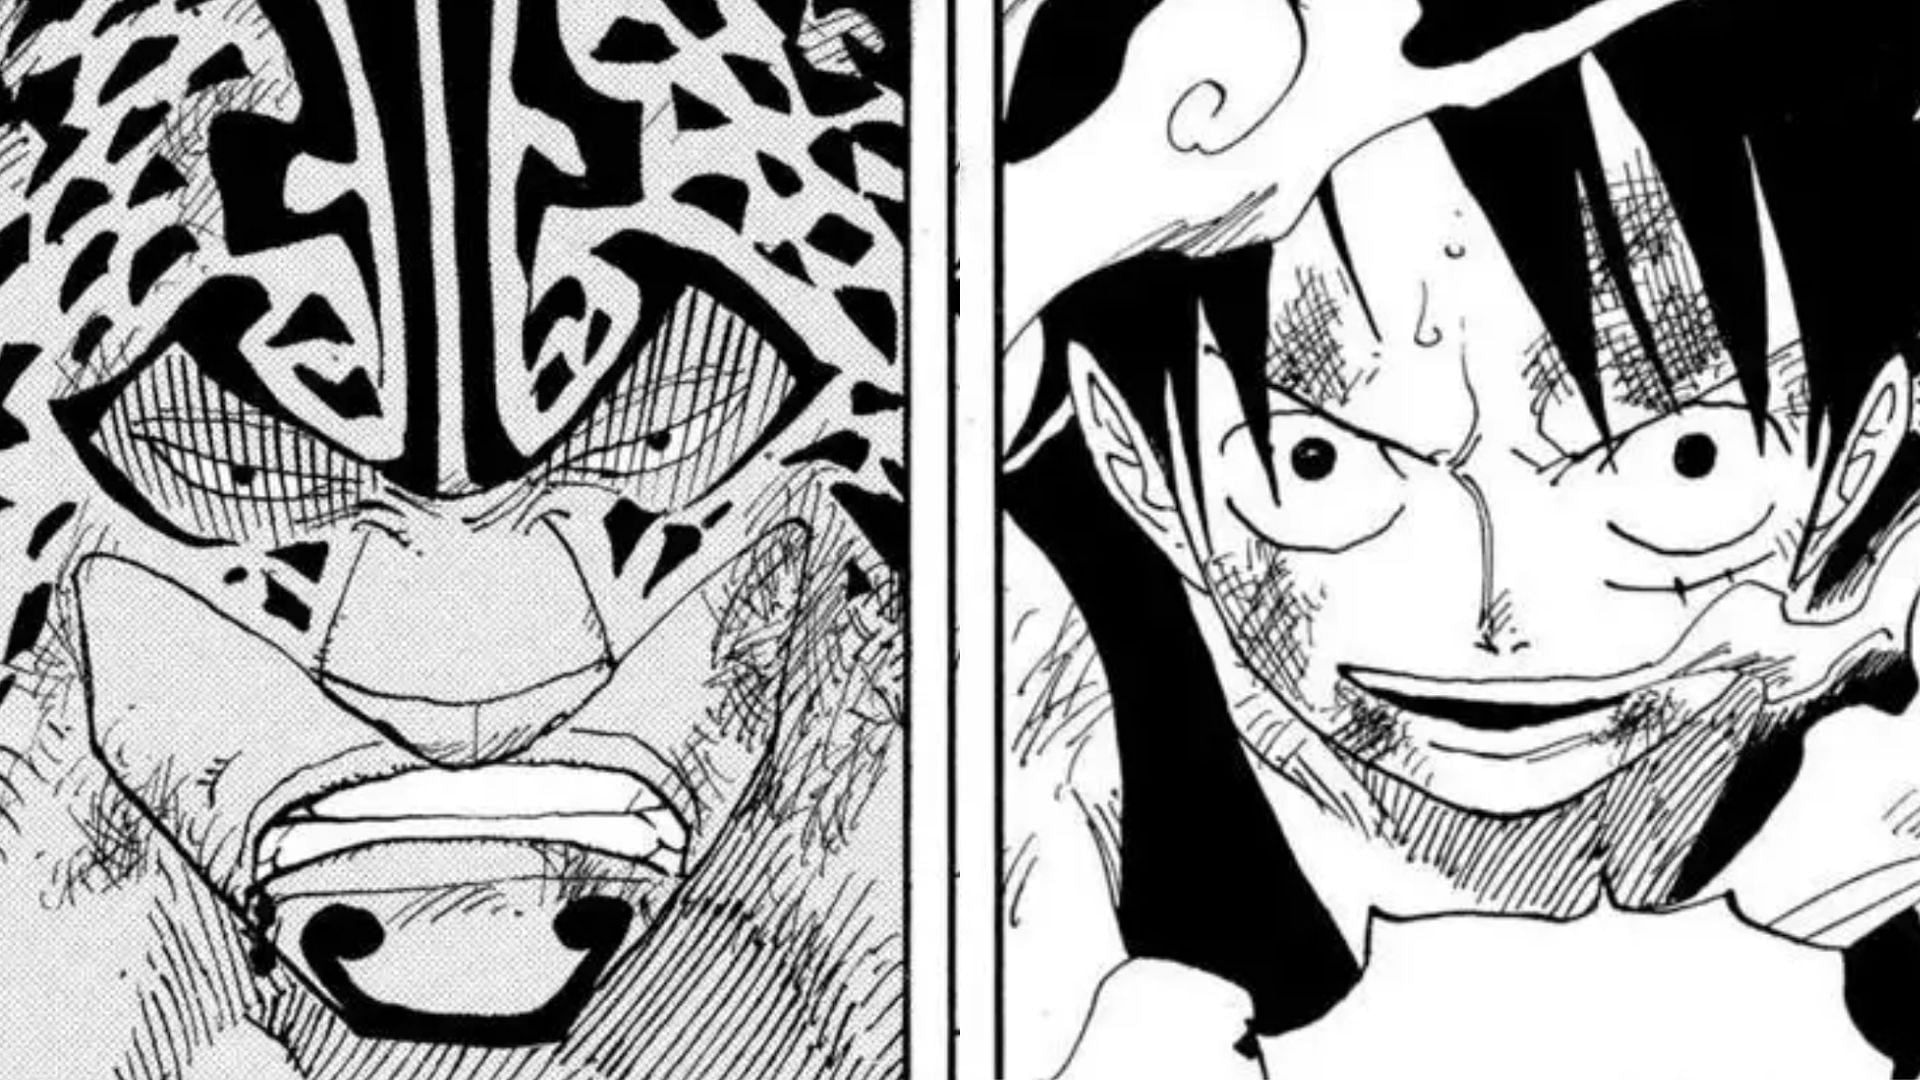 One Piece 1069 Spoilers & Raw Scan: Luffy vs Lucci Results Revealed -  OtakuKart